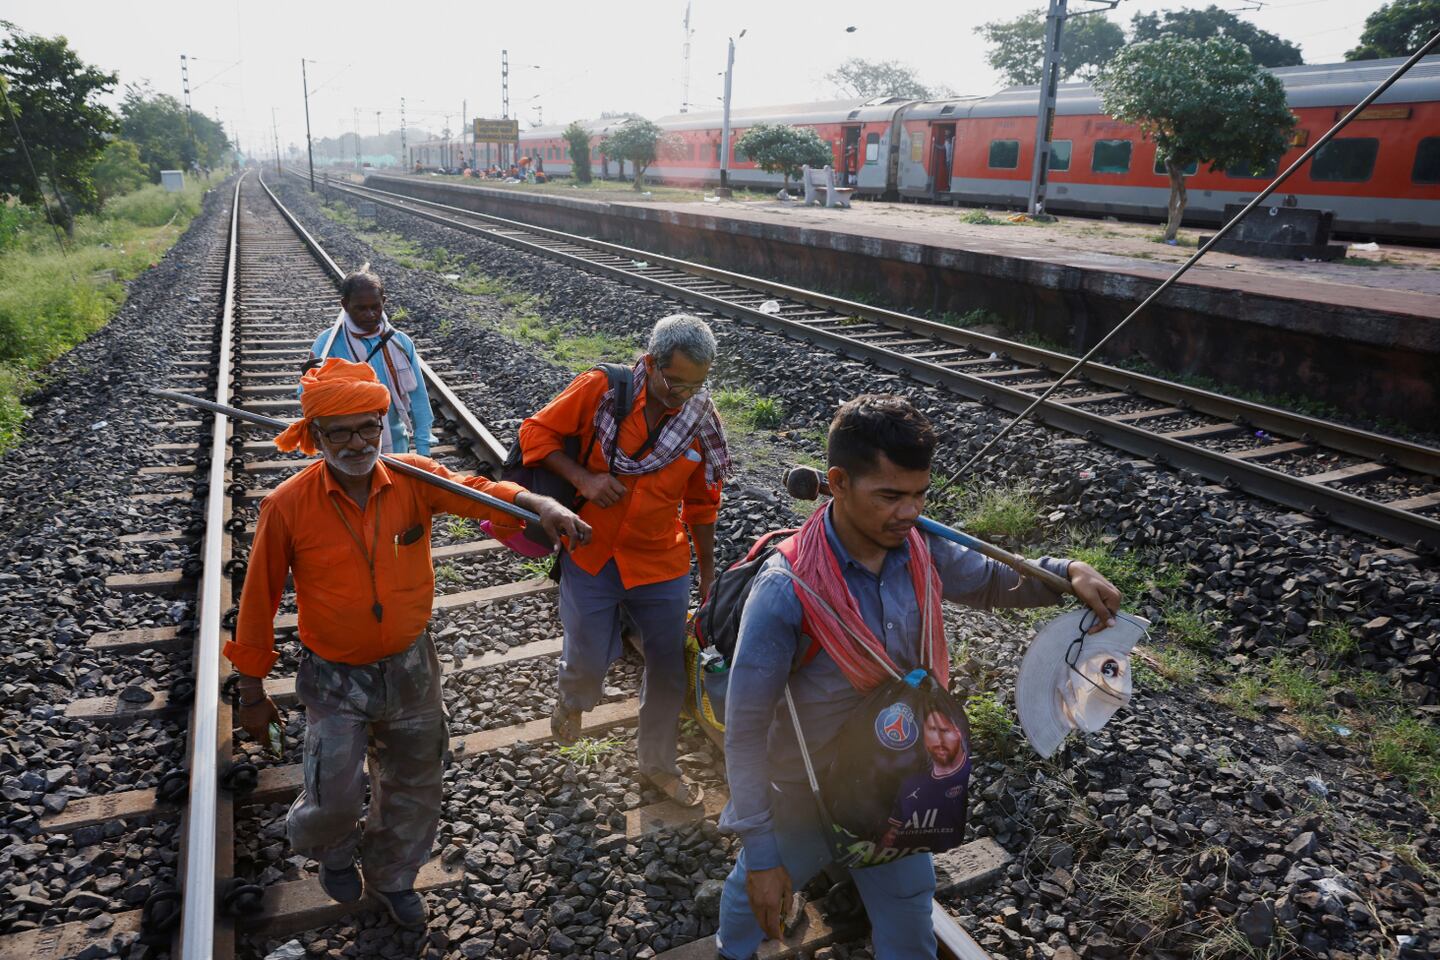 Cargo train restarted on Indian tracks where 275 people were killed